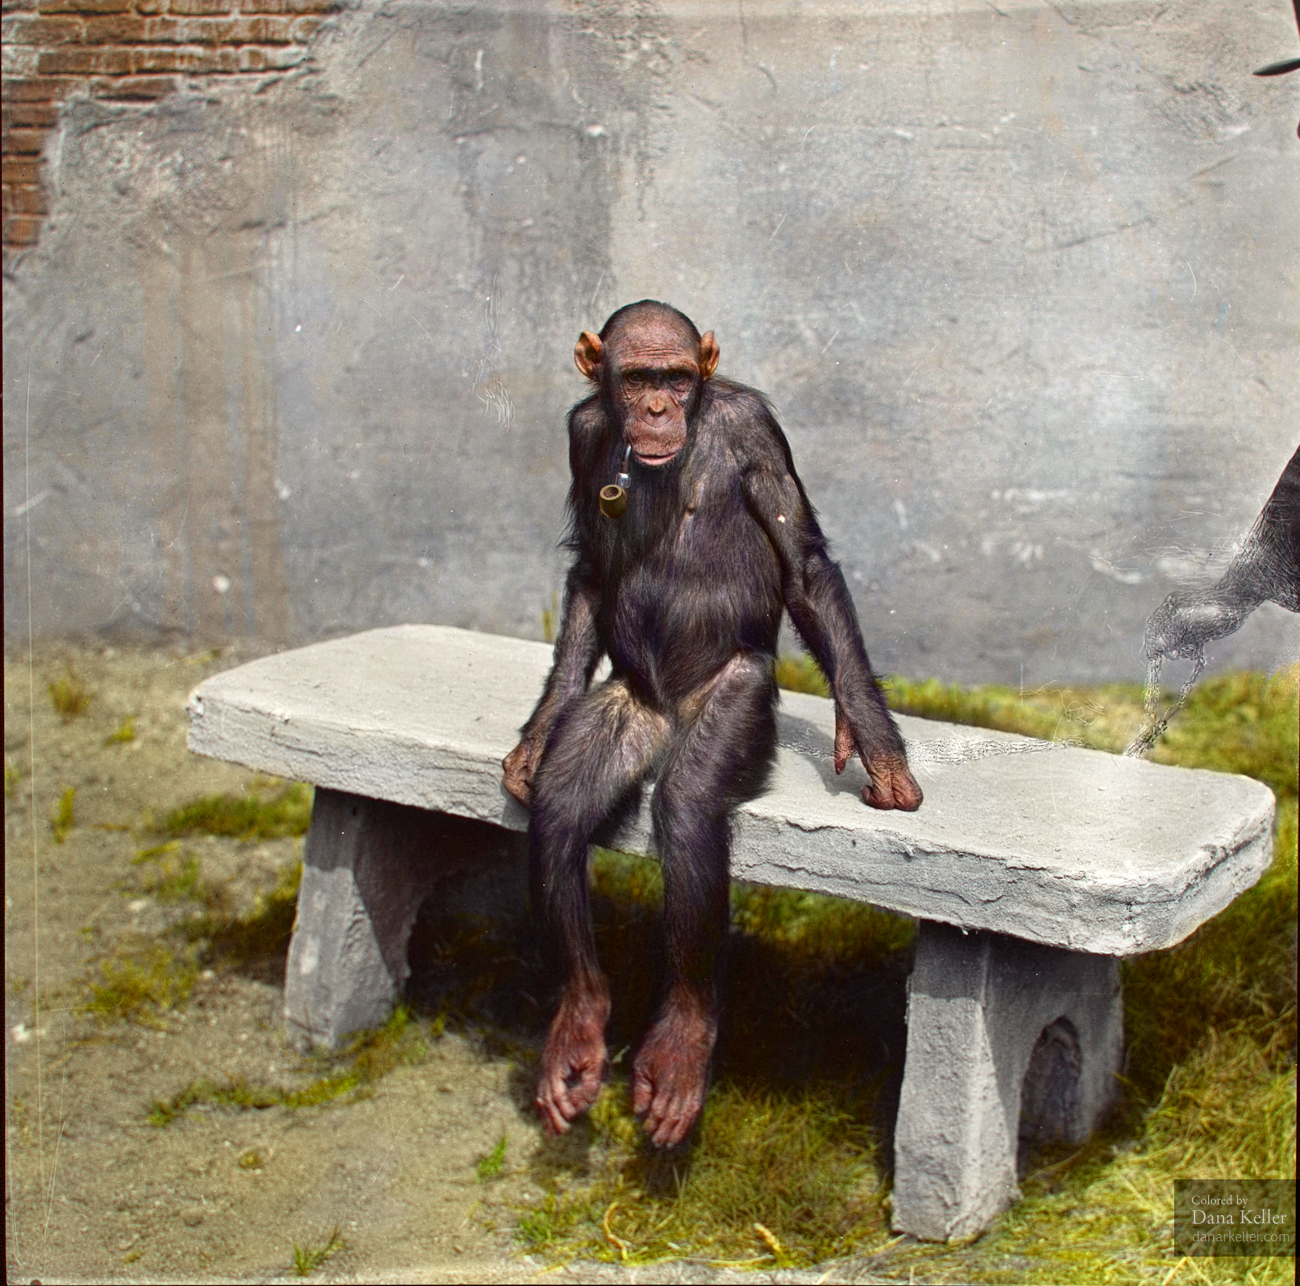 8. Mary the chimp, sitting on a bench with a pipe, ca. 1940.